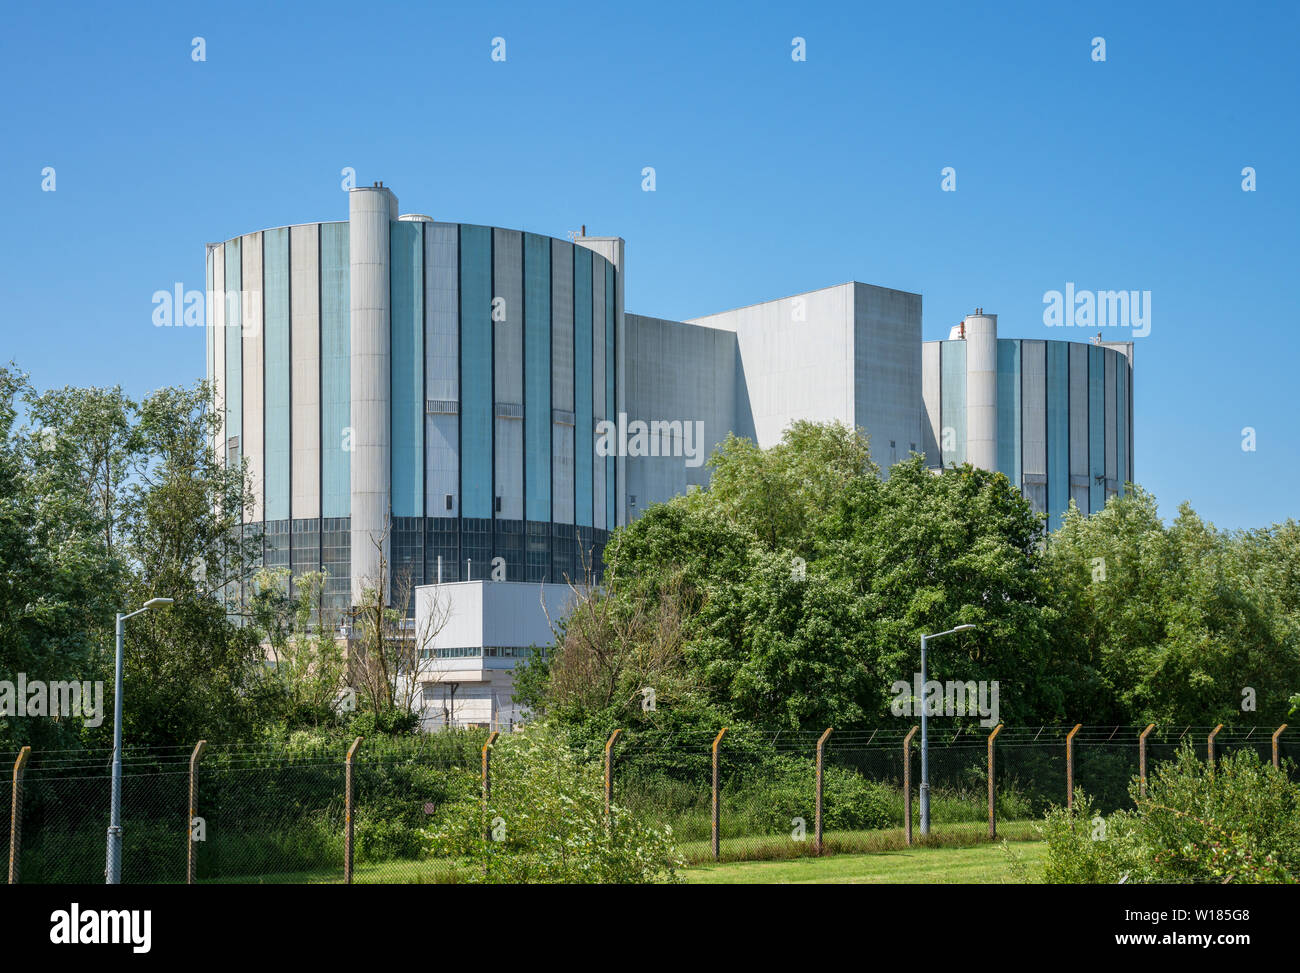 Oldbury Magnox Nuclear Power Station. Now decommissioned one of the oldest nuclear reactors in the world. Oldbury on Severn, South Gloucestershire, Un Stock Photo